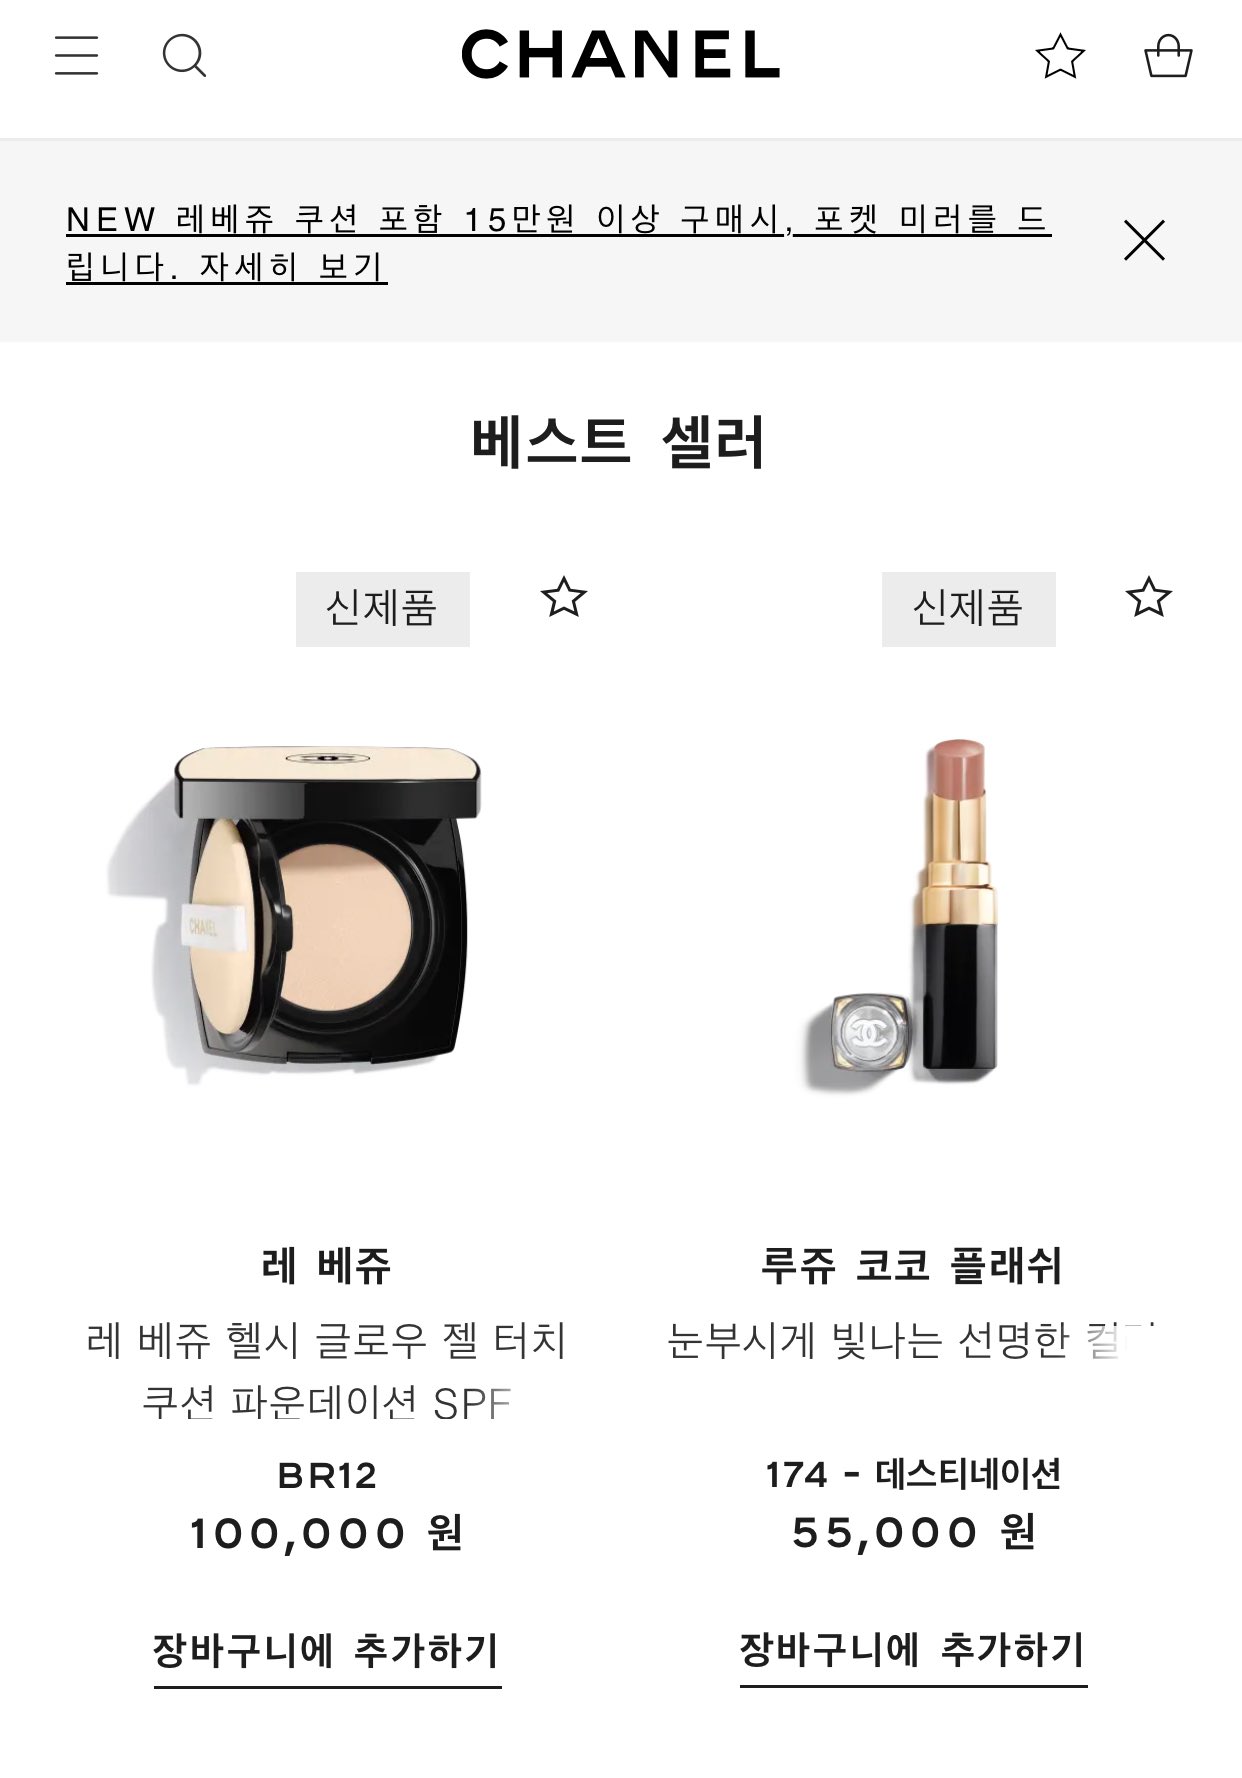 𝙉𝙚𝙬𝙅𝙚𝙖𝙣𝙨 𝘽𝙧𝙖𝙣𝙙𝙨 в X: „The 'Les Beiges Gel Cushion' foundation  is @CHANEL's #1 best selling makeup item in Korea! —This is the product  Minji is endorsing for Chanel Beauty with W Korea! #